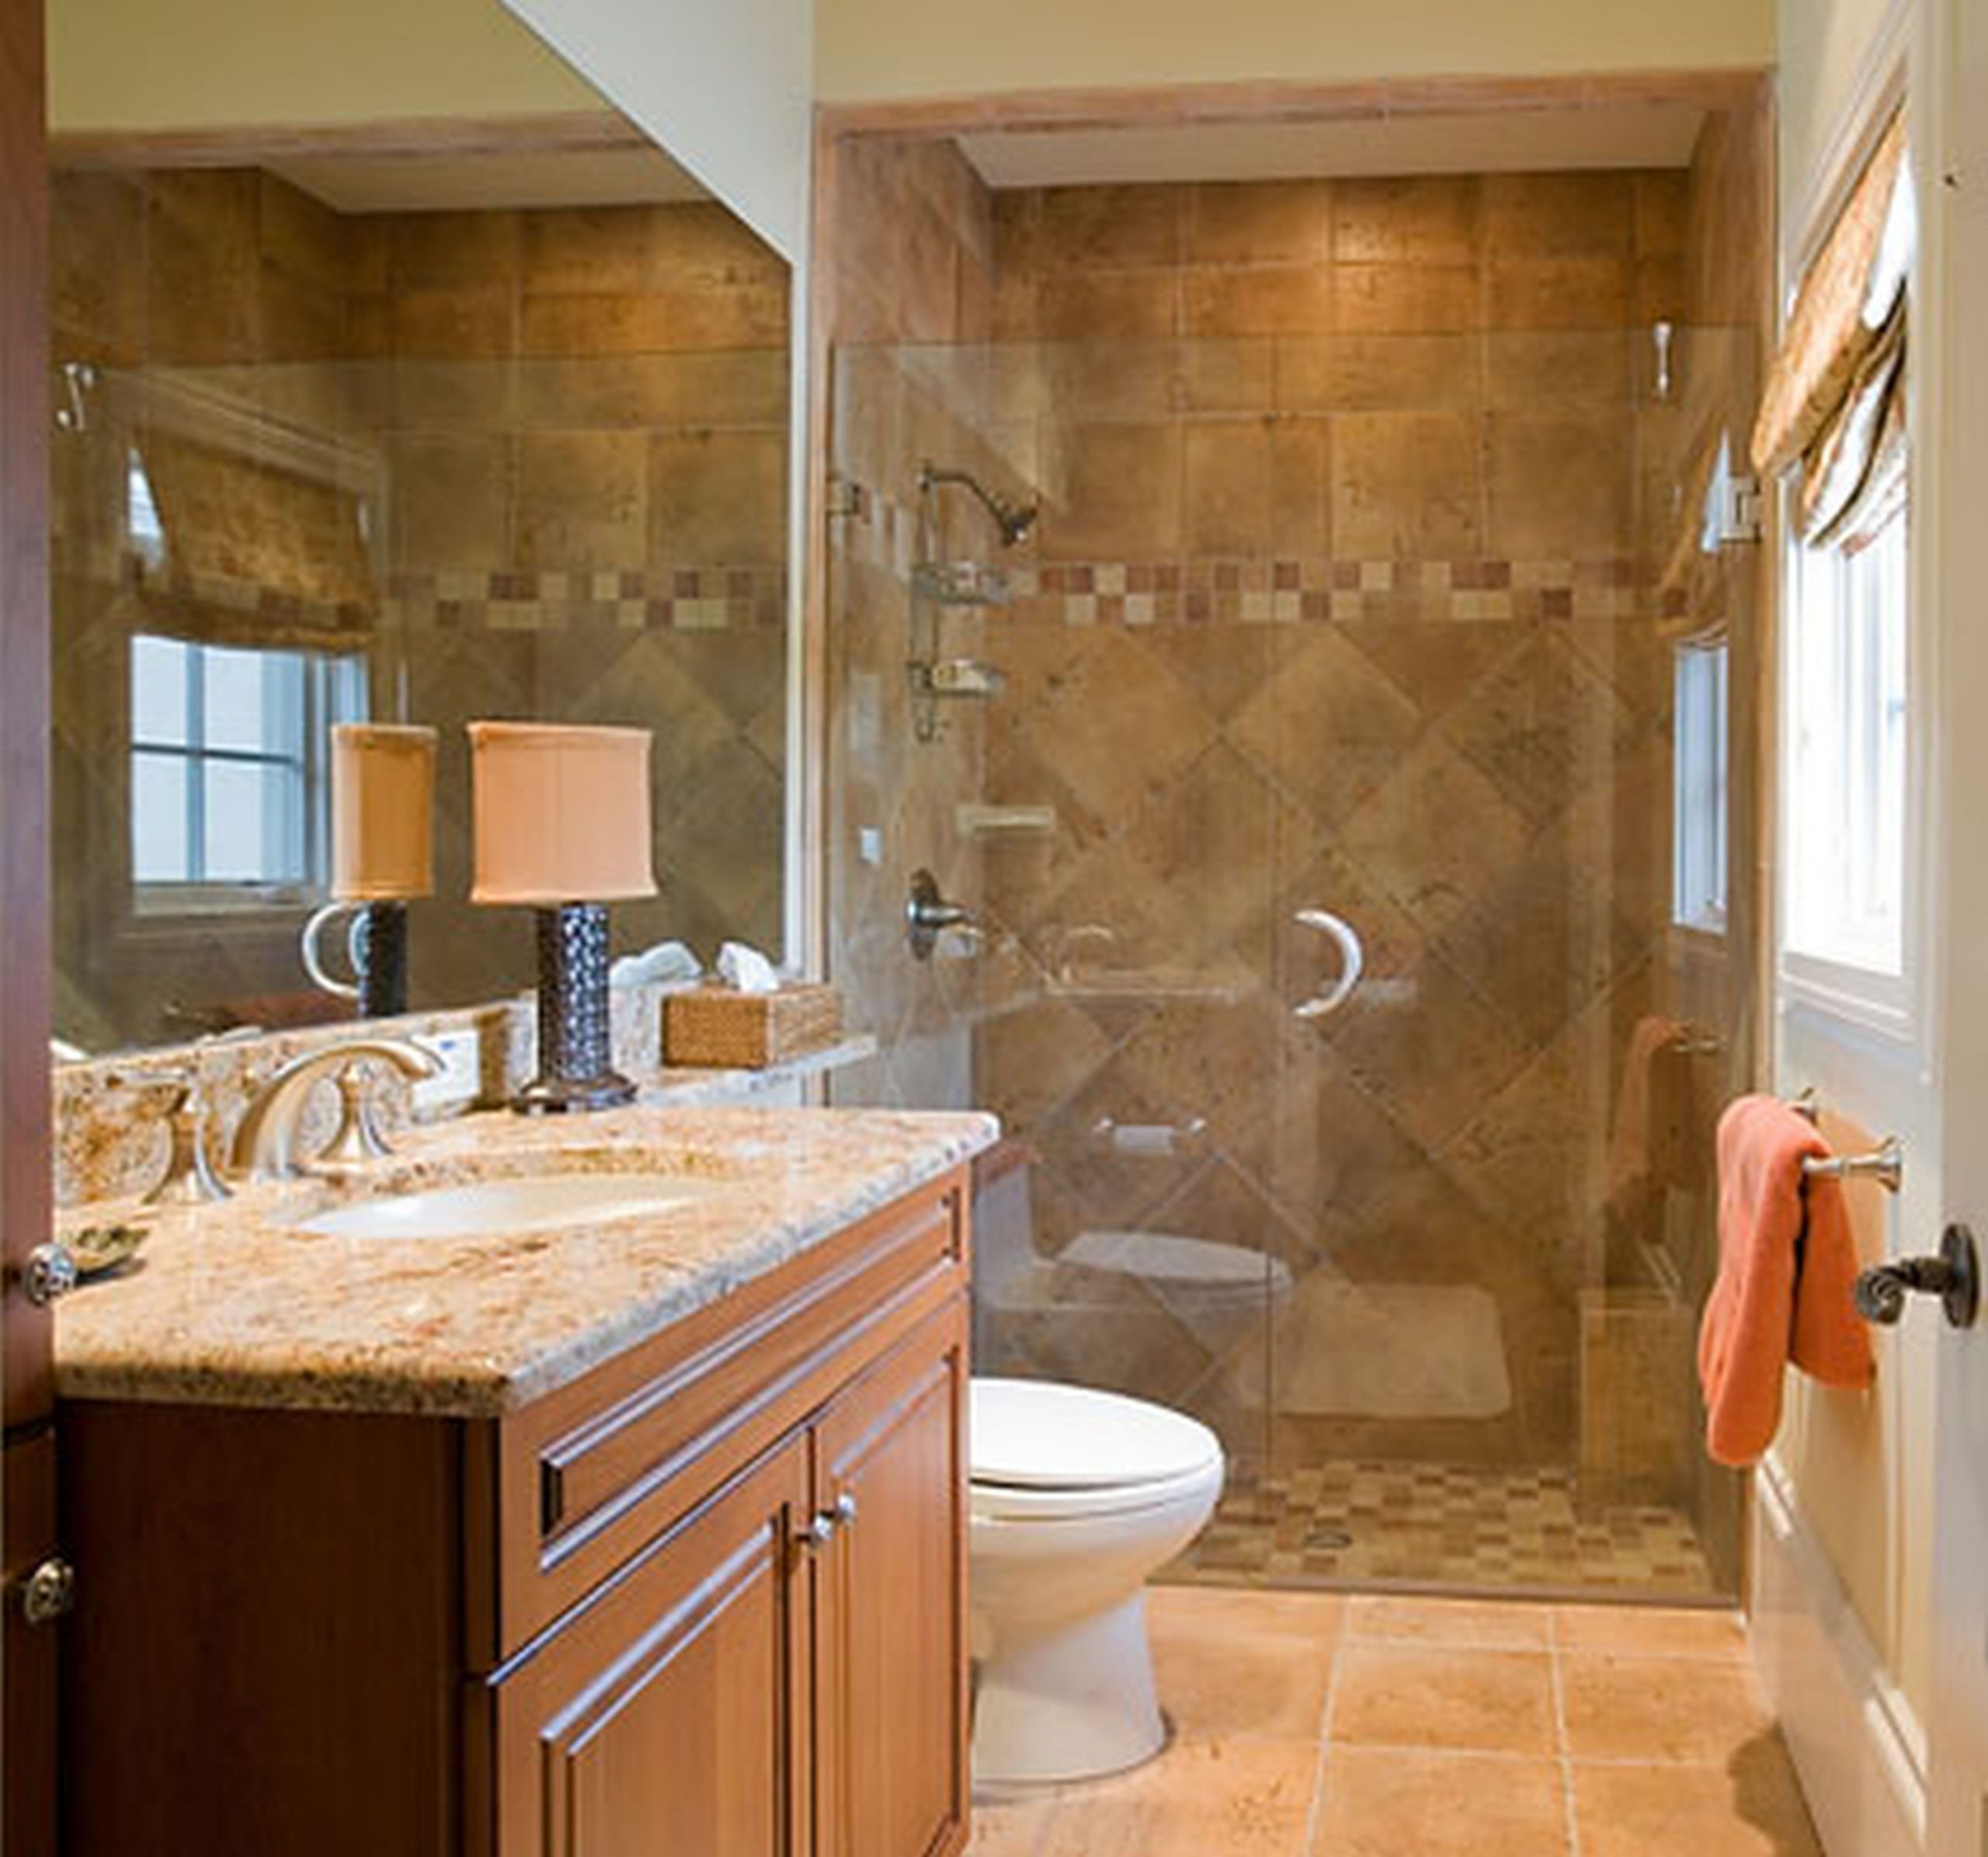 Small Bathroom With Tub Ideas
 Small Bathroom Remodel Ideas in Varied Modern Concepts